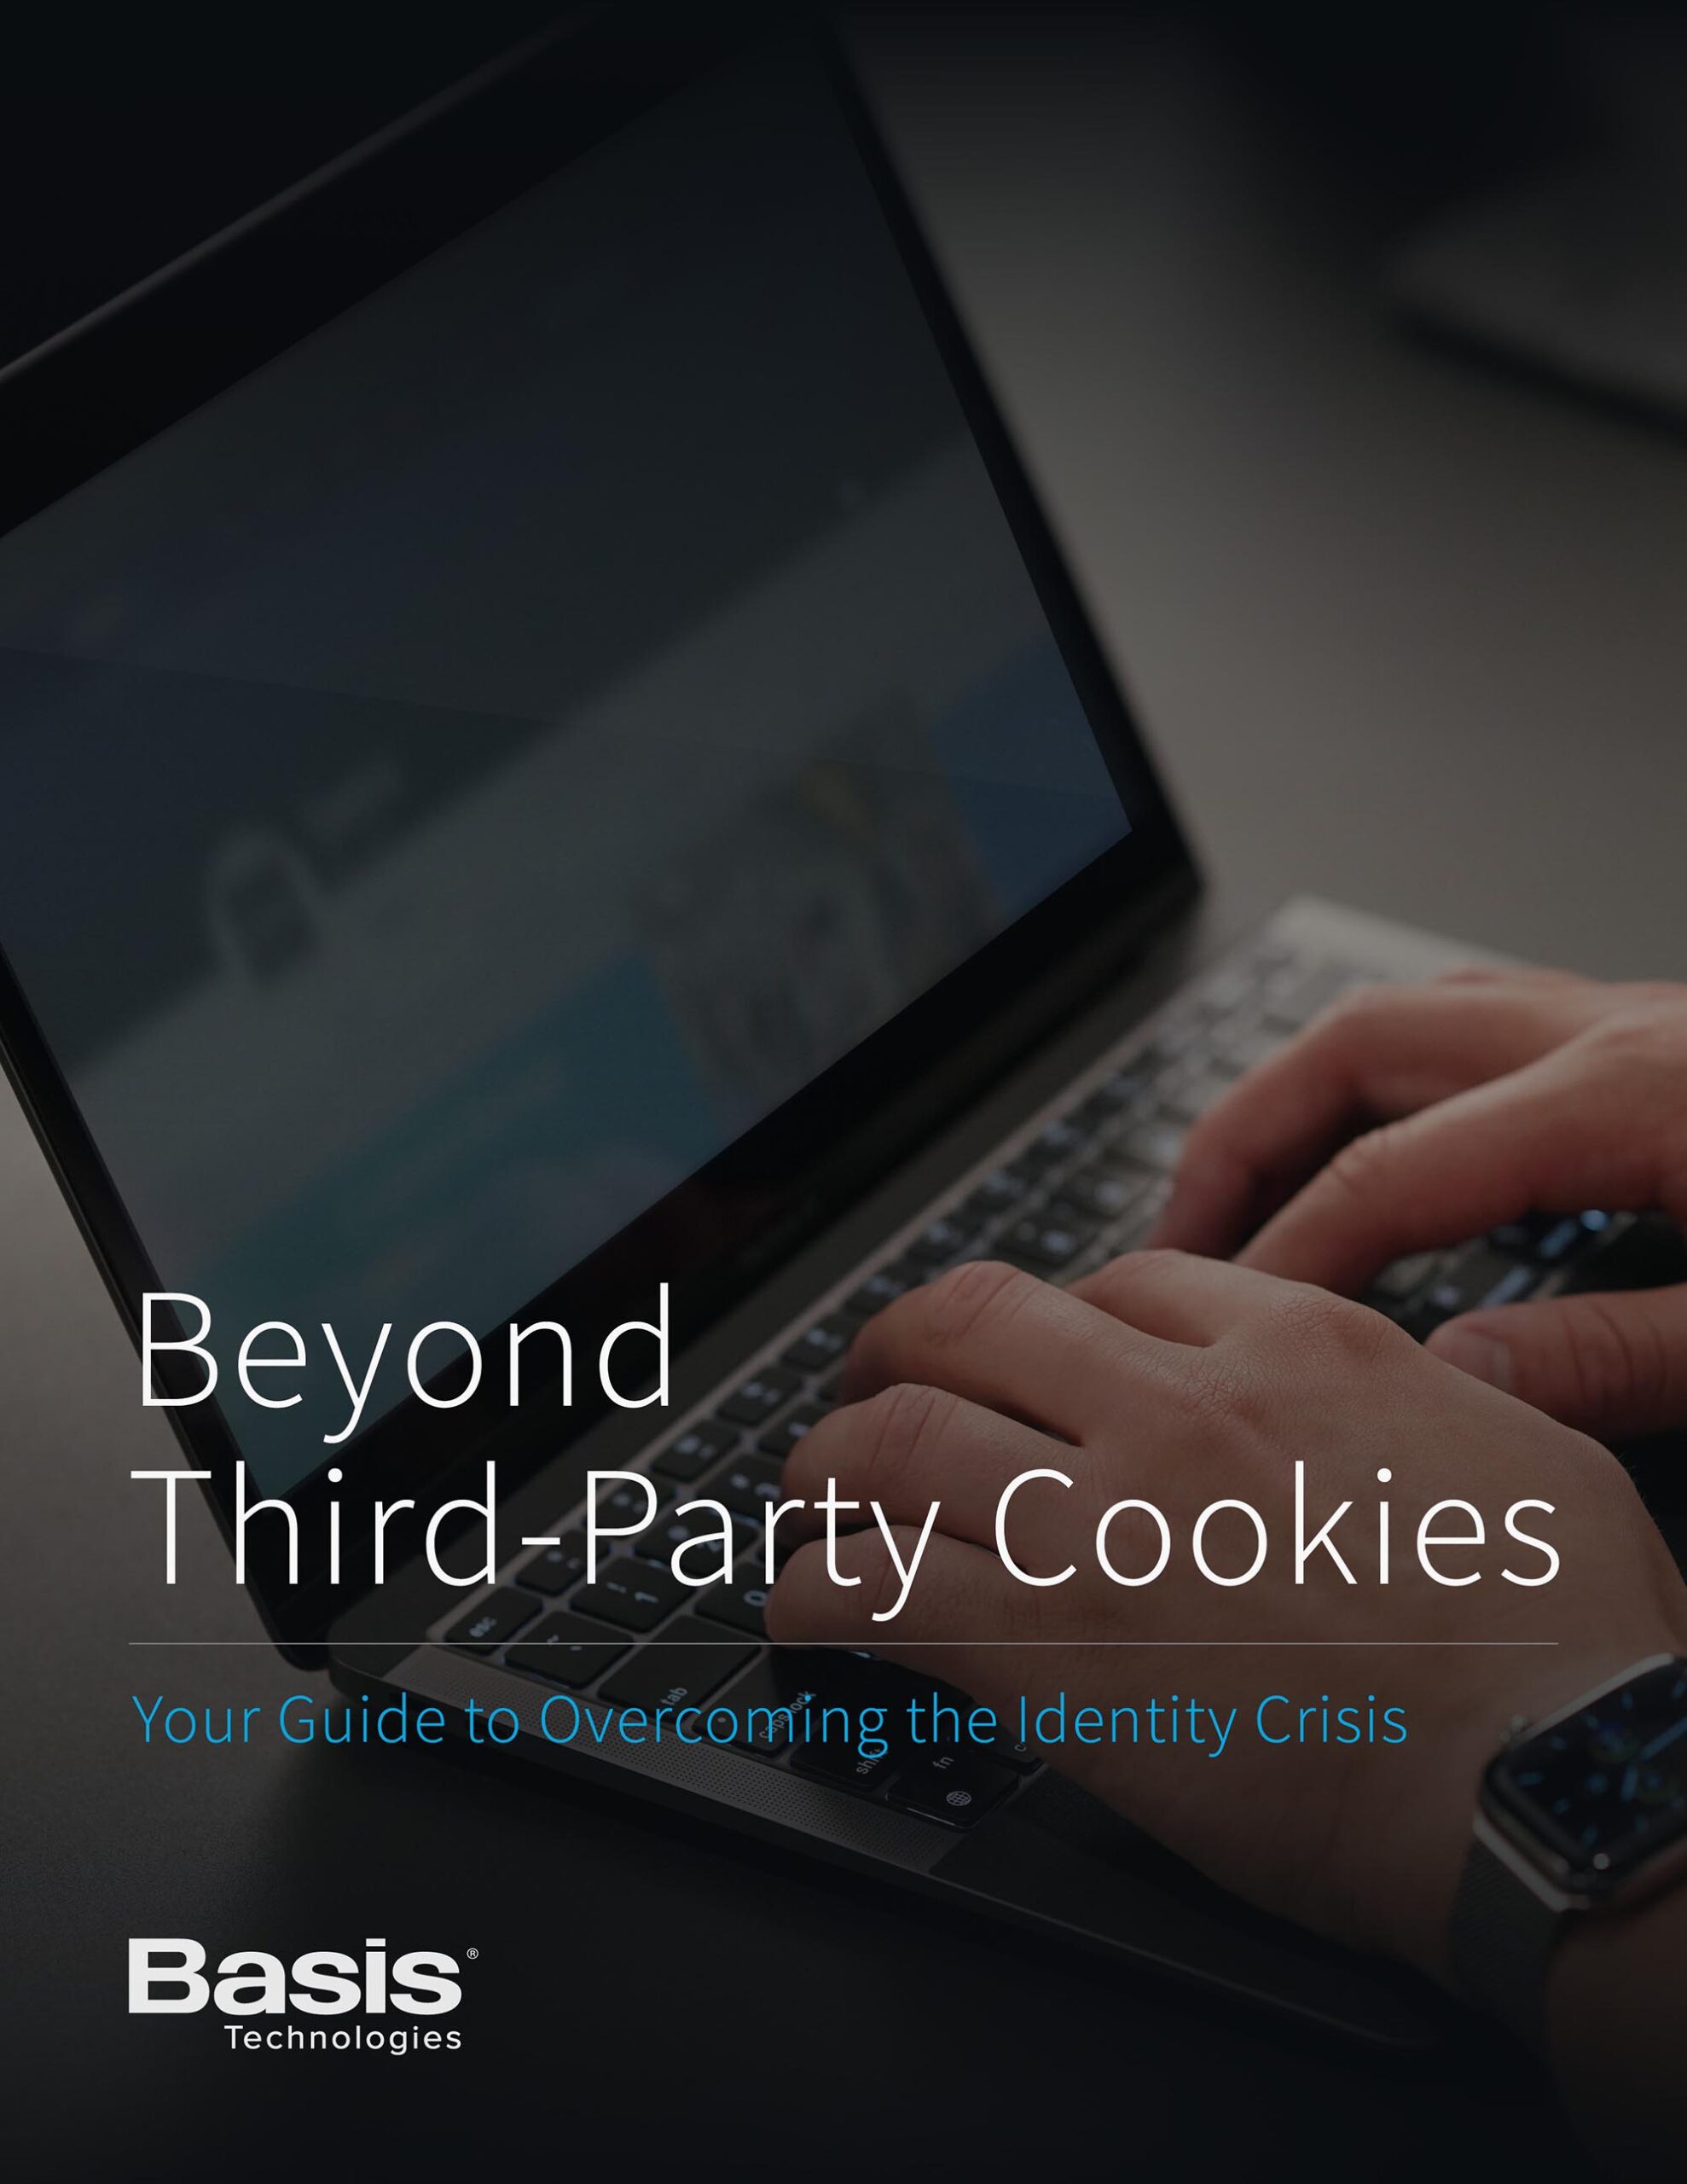 Beyond 3rd Party Cookies guide cover